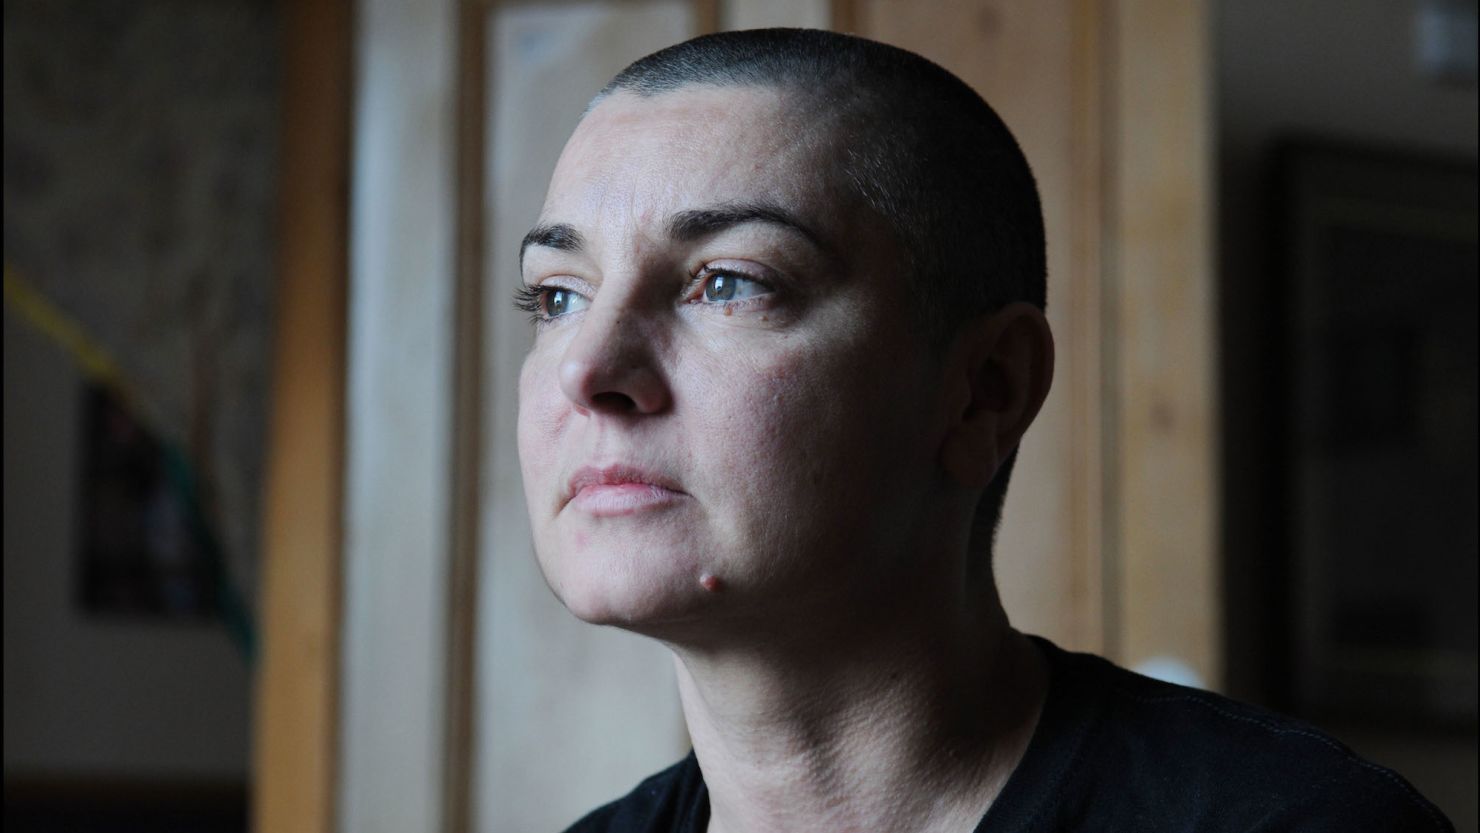 Sinead O'Connor at her home in County Wicklow, Republic of Ireland in 2012.